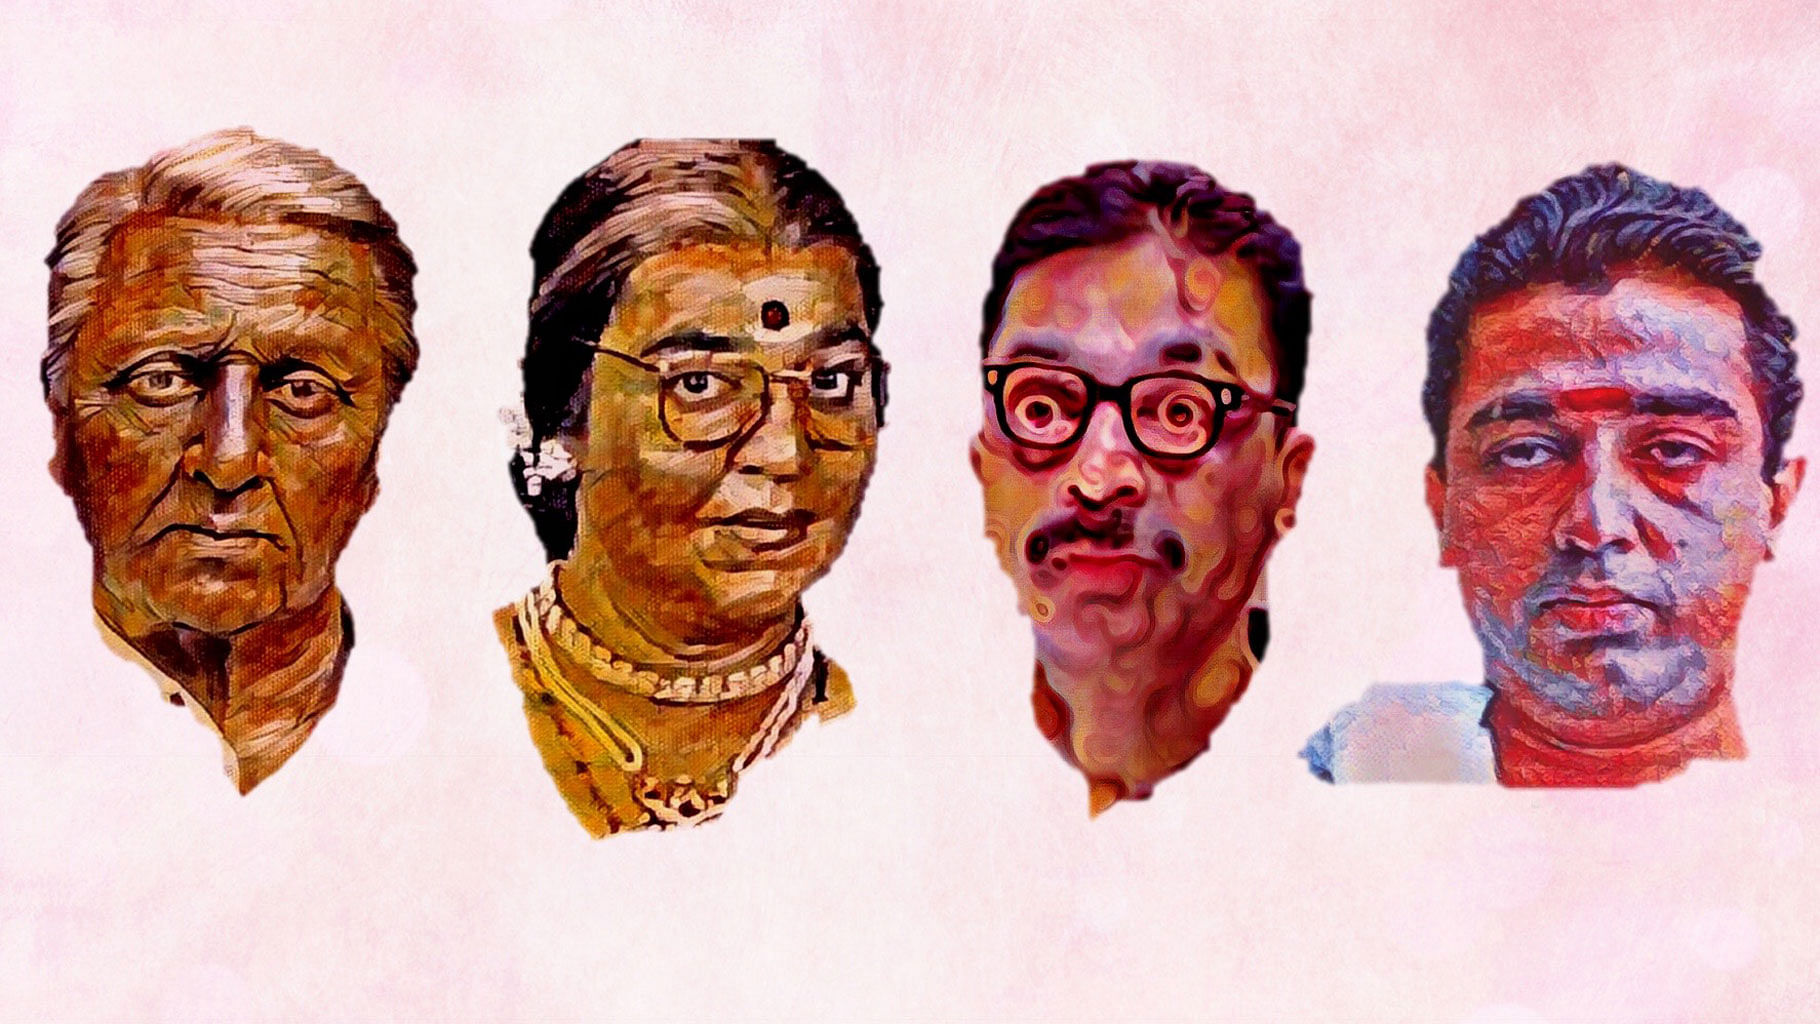 Indian, Chachi 420 or Anbe Sivam’s die-hard communist, what kind of ‘Nayagan’ will Kamal Haasan, the politician be?